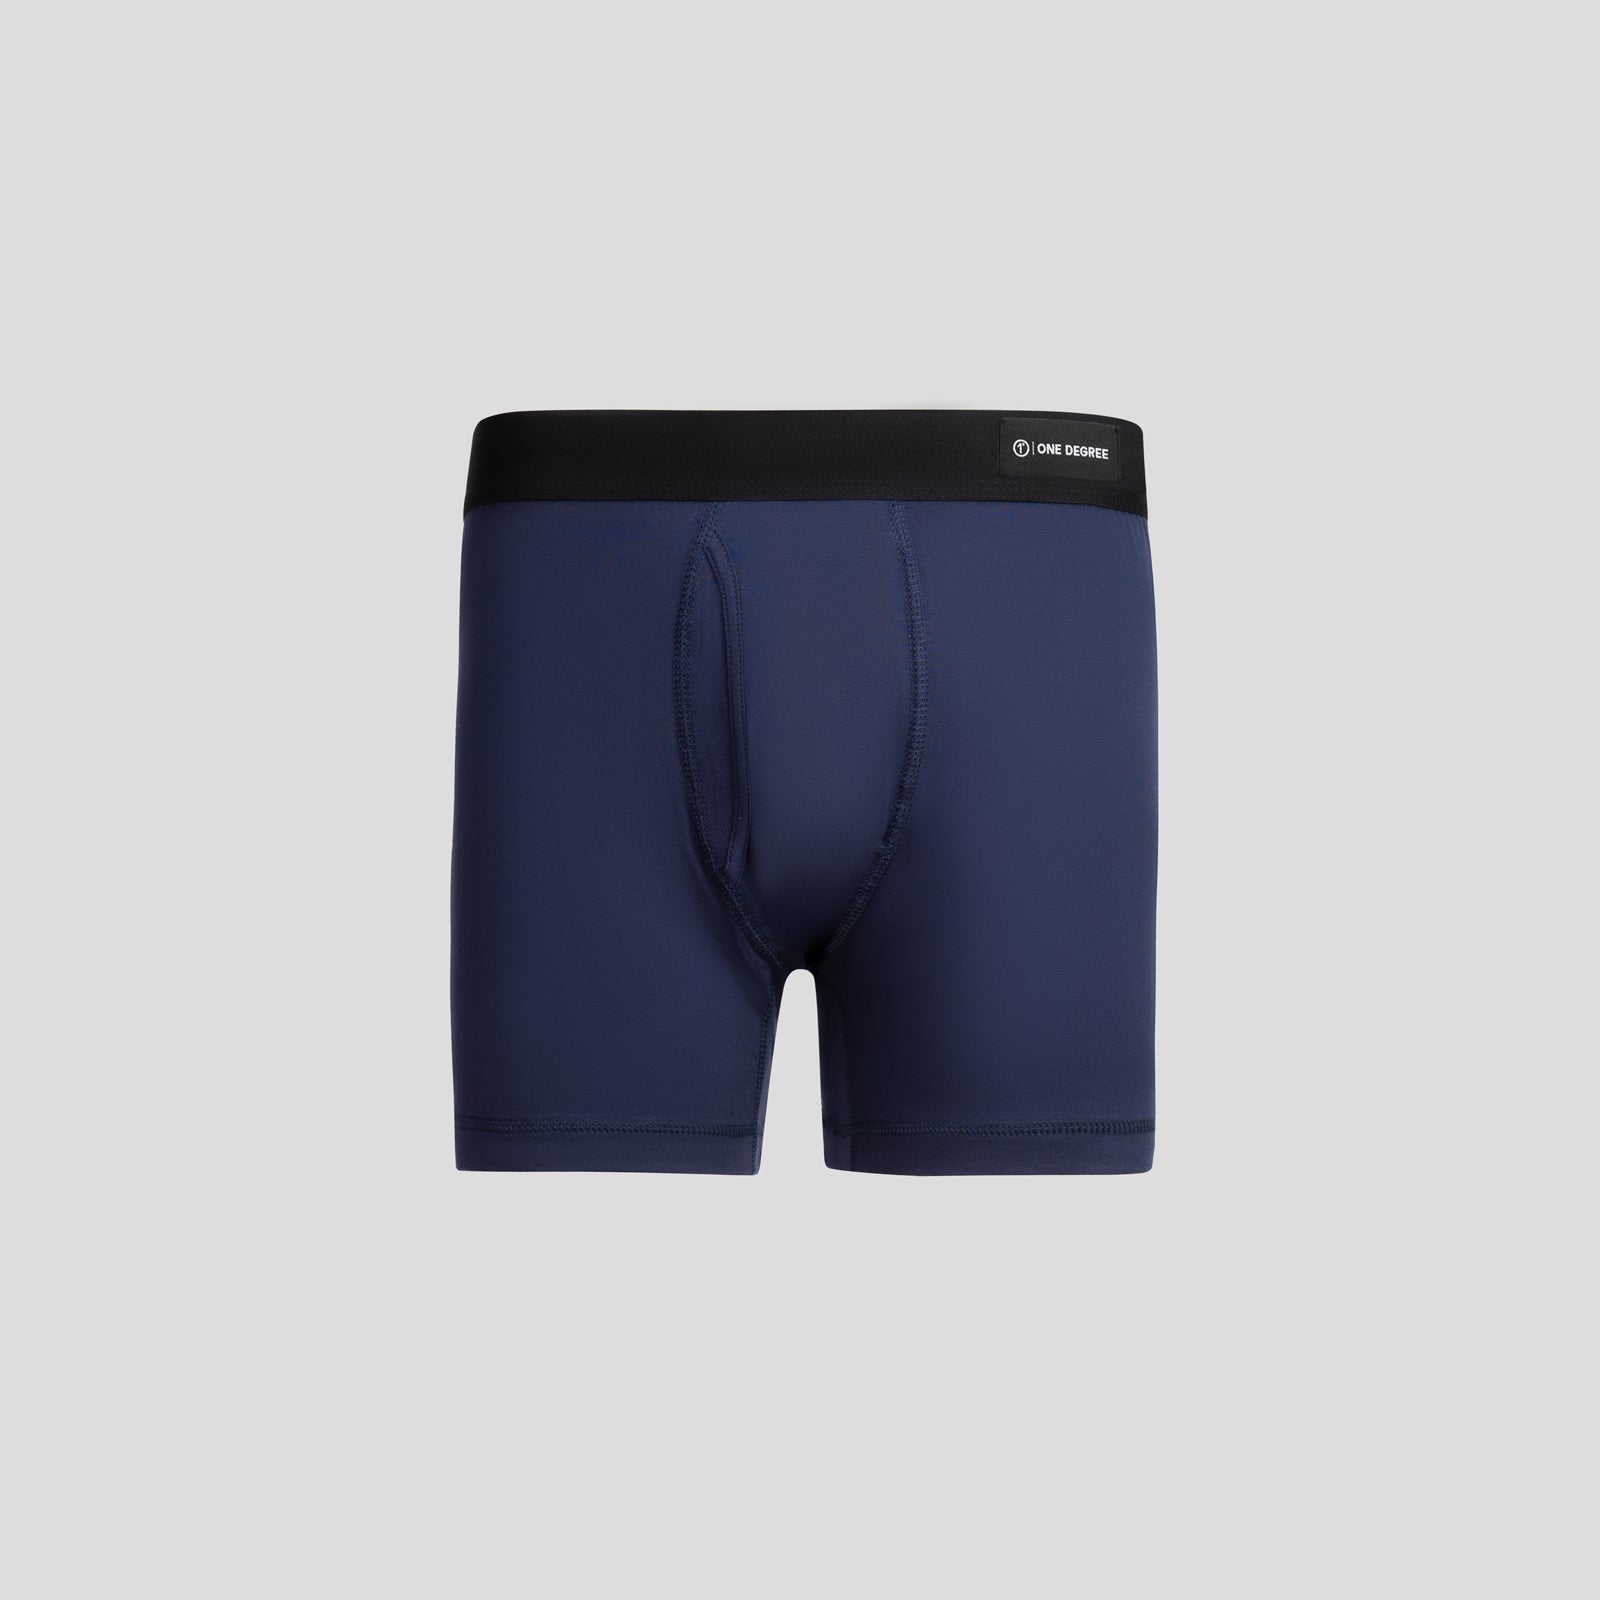 Pack of Two Black and Navy Boxer